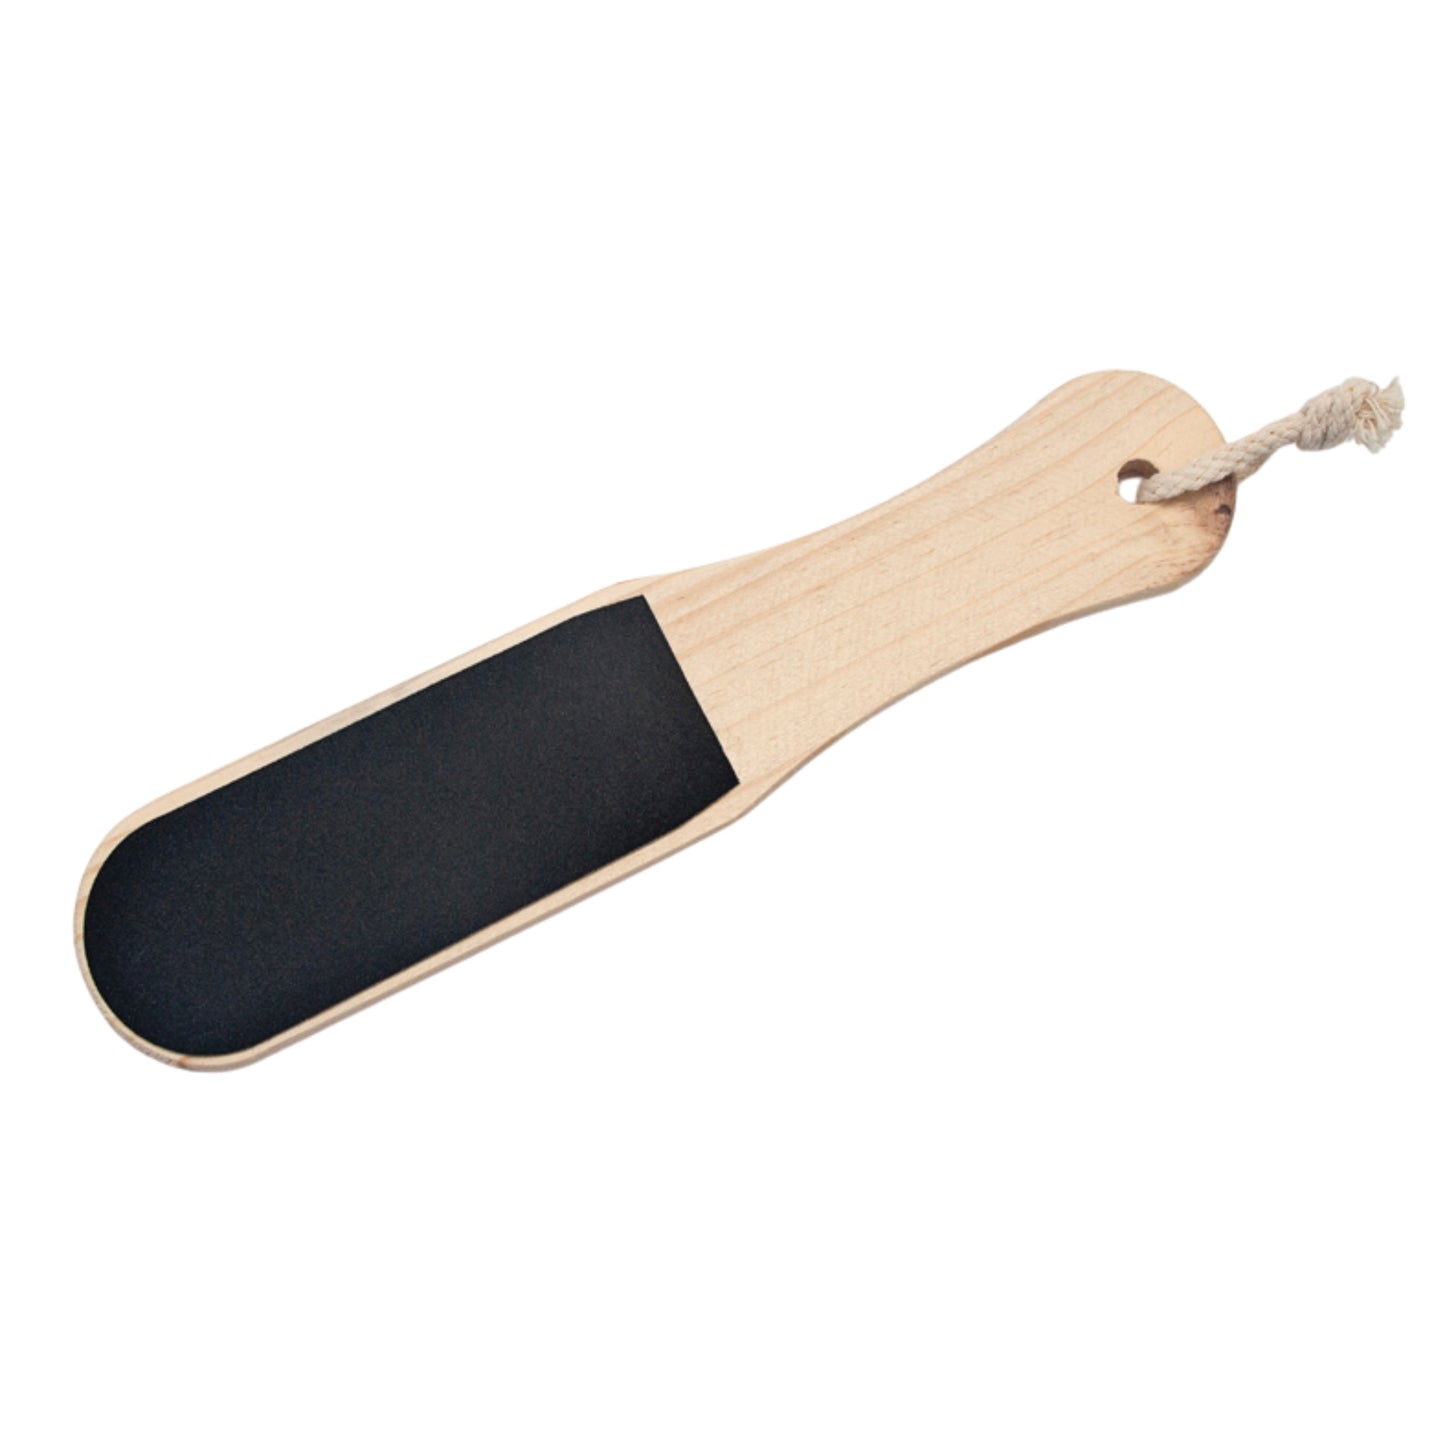 Wooden Foot File